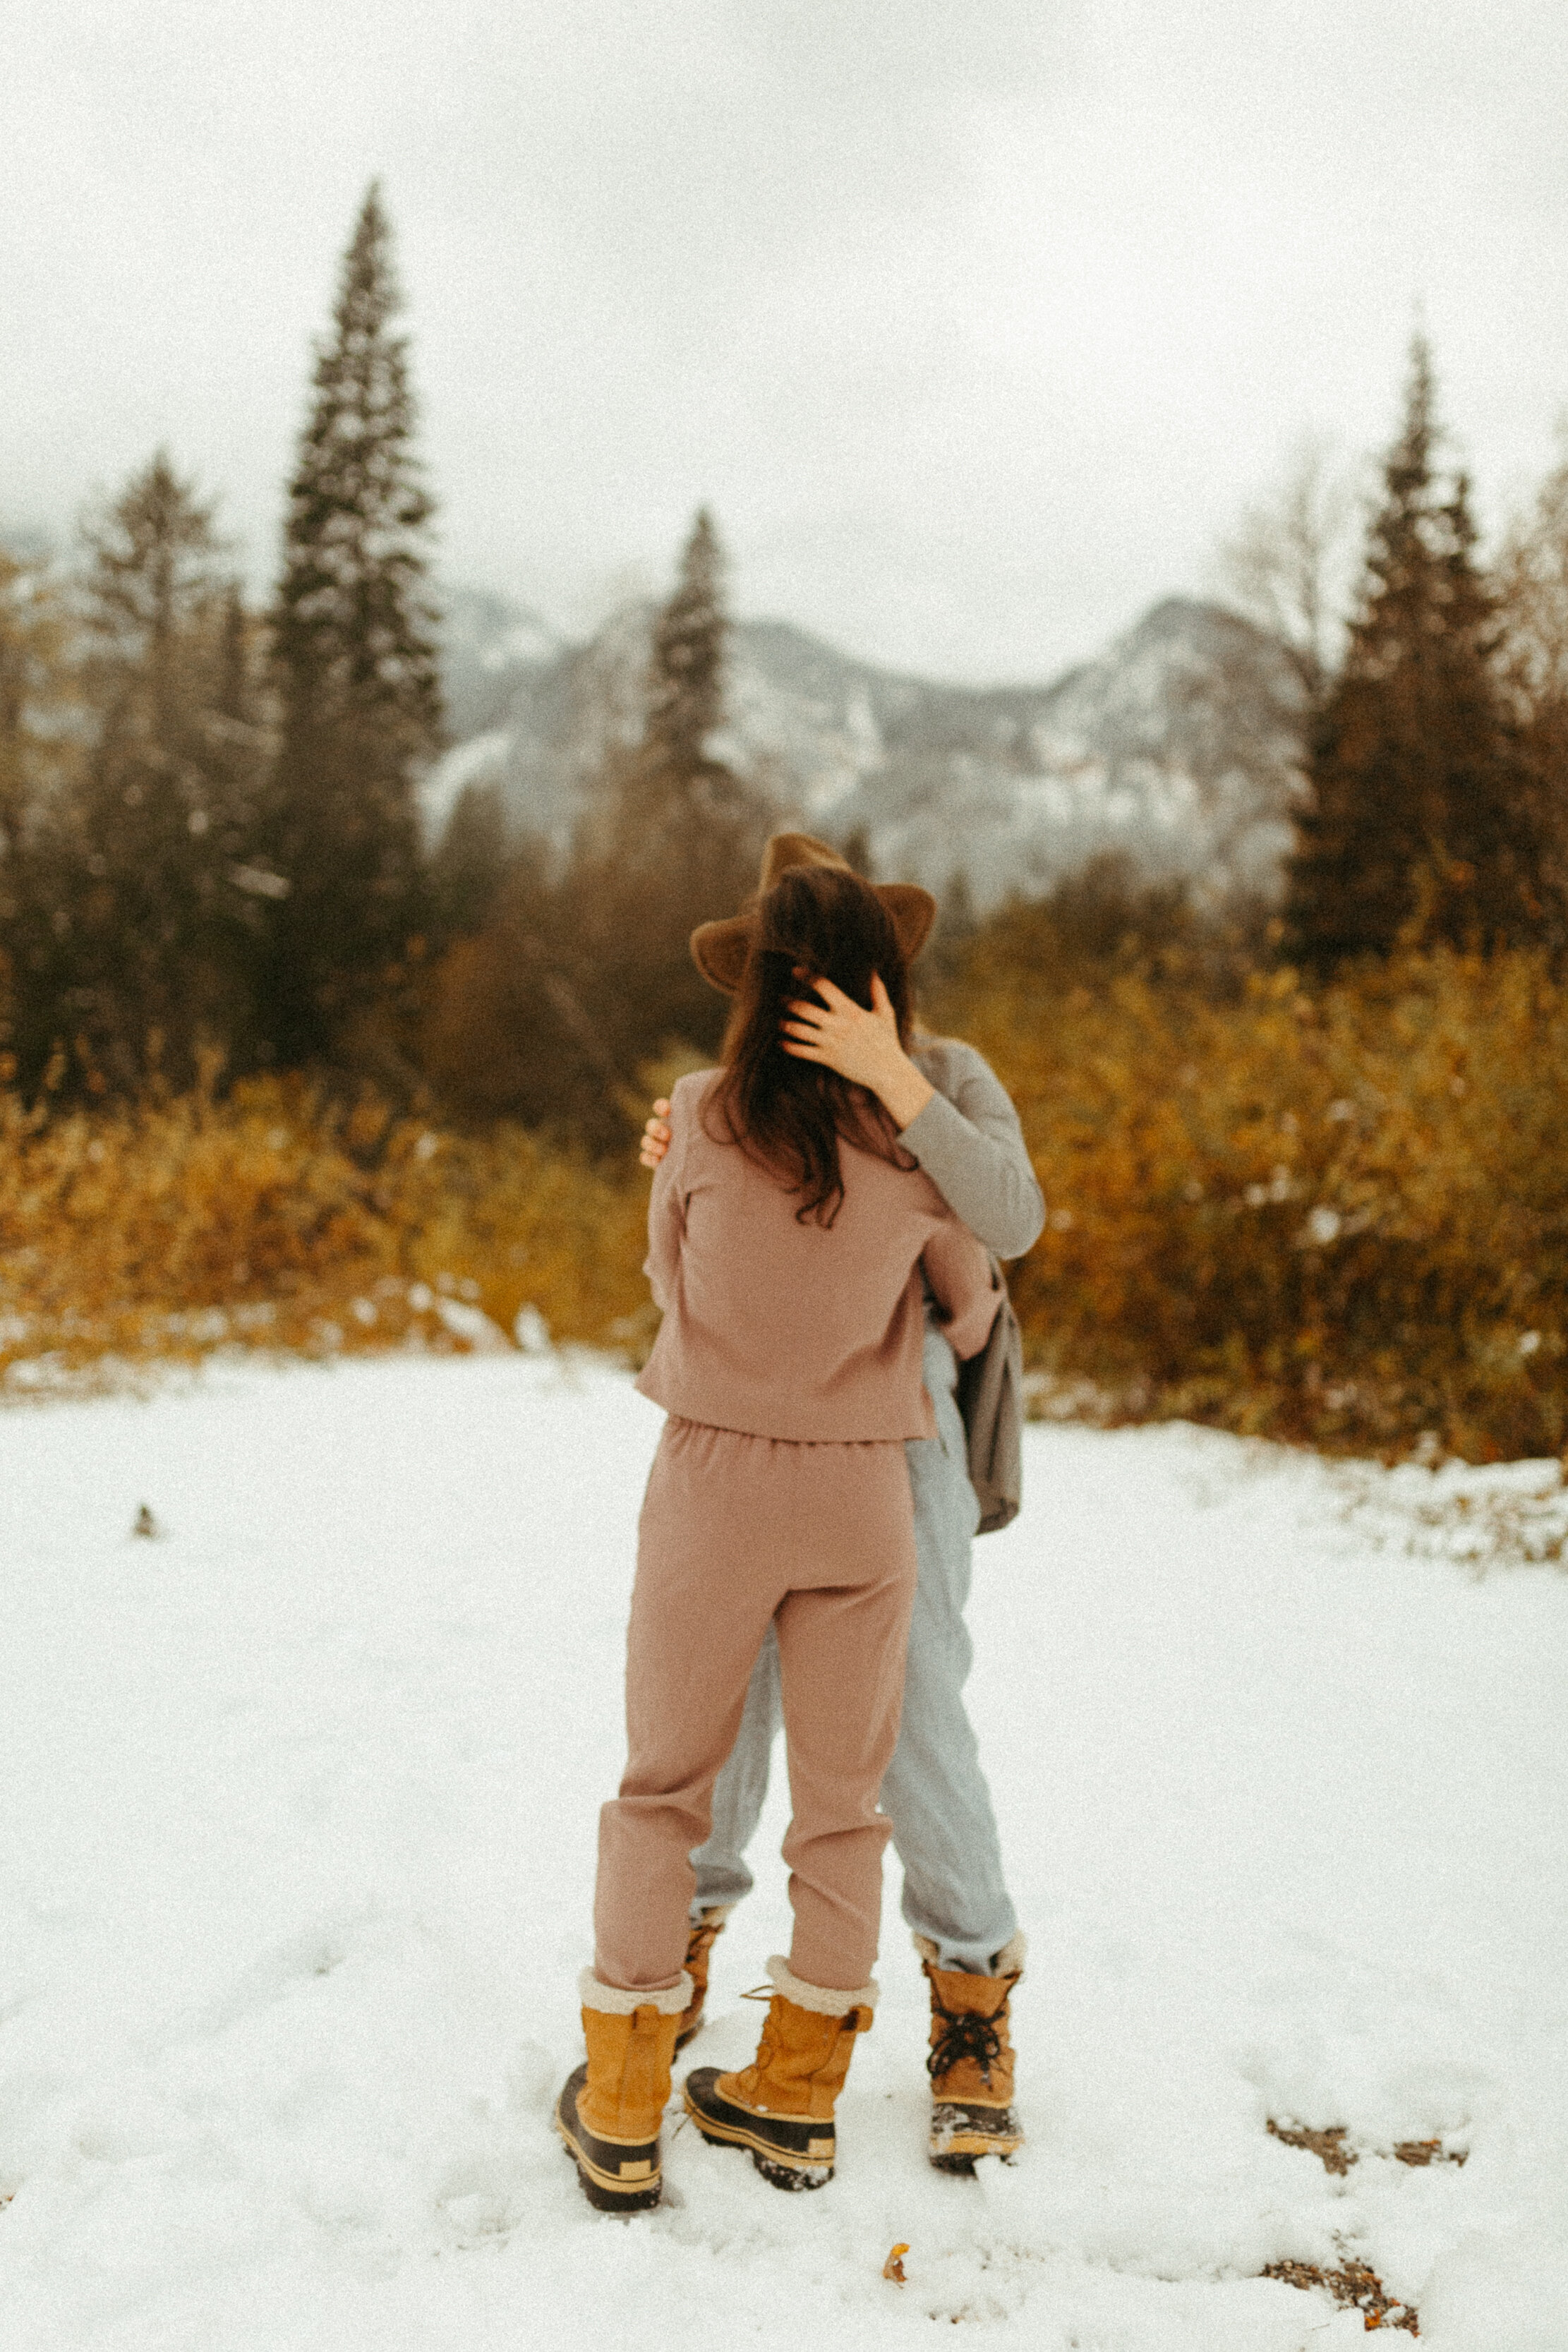 queer-gay-lesbian-trans-affirming-lgbtq-adventure-elopement-intimate-wedding-photographer-pnw-pacific-northwest-pnw-mountain-stream-forest-cowgay-tacoma-seattle-washington-portland-oregon-halle-roland-photography-non-binary-analog-film-artist-165-122.jpg